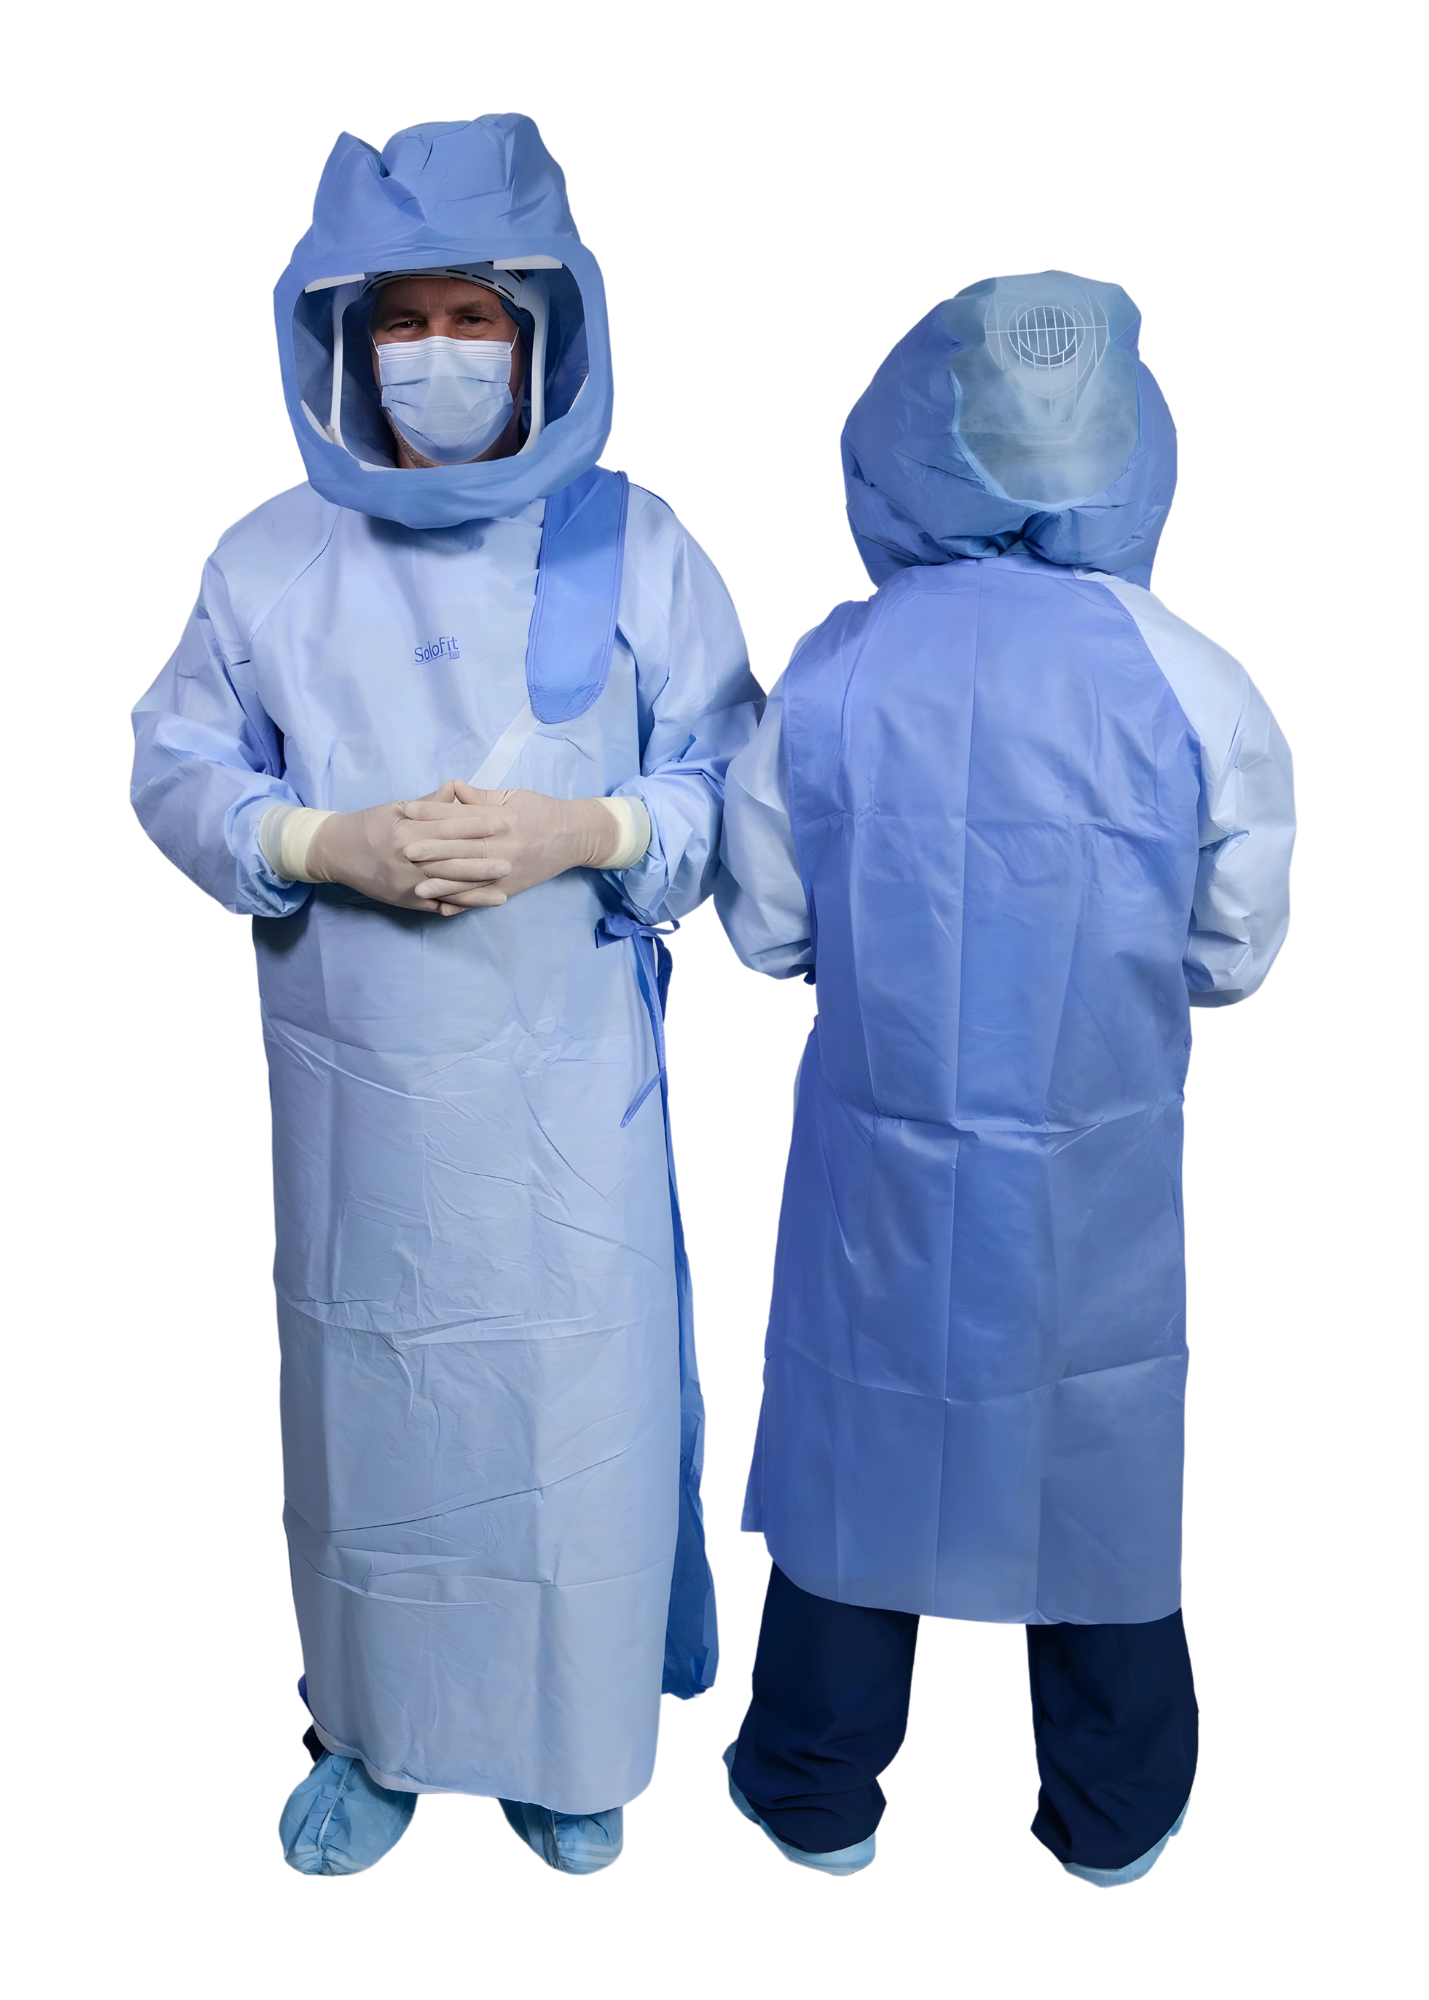 The Modular Toga, an innovative orthopedic surgical gown developed by OR Innovations, revolutionizes infection control in the O.R. by significantly reducing airborne particle concentrations, thereby merging the functionality of a surgical toga gown with enhanced safety and flexibility for patients and staff.